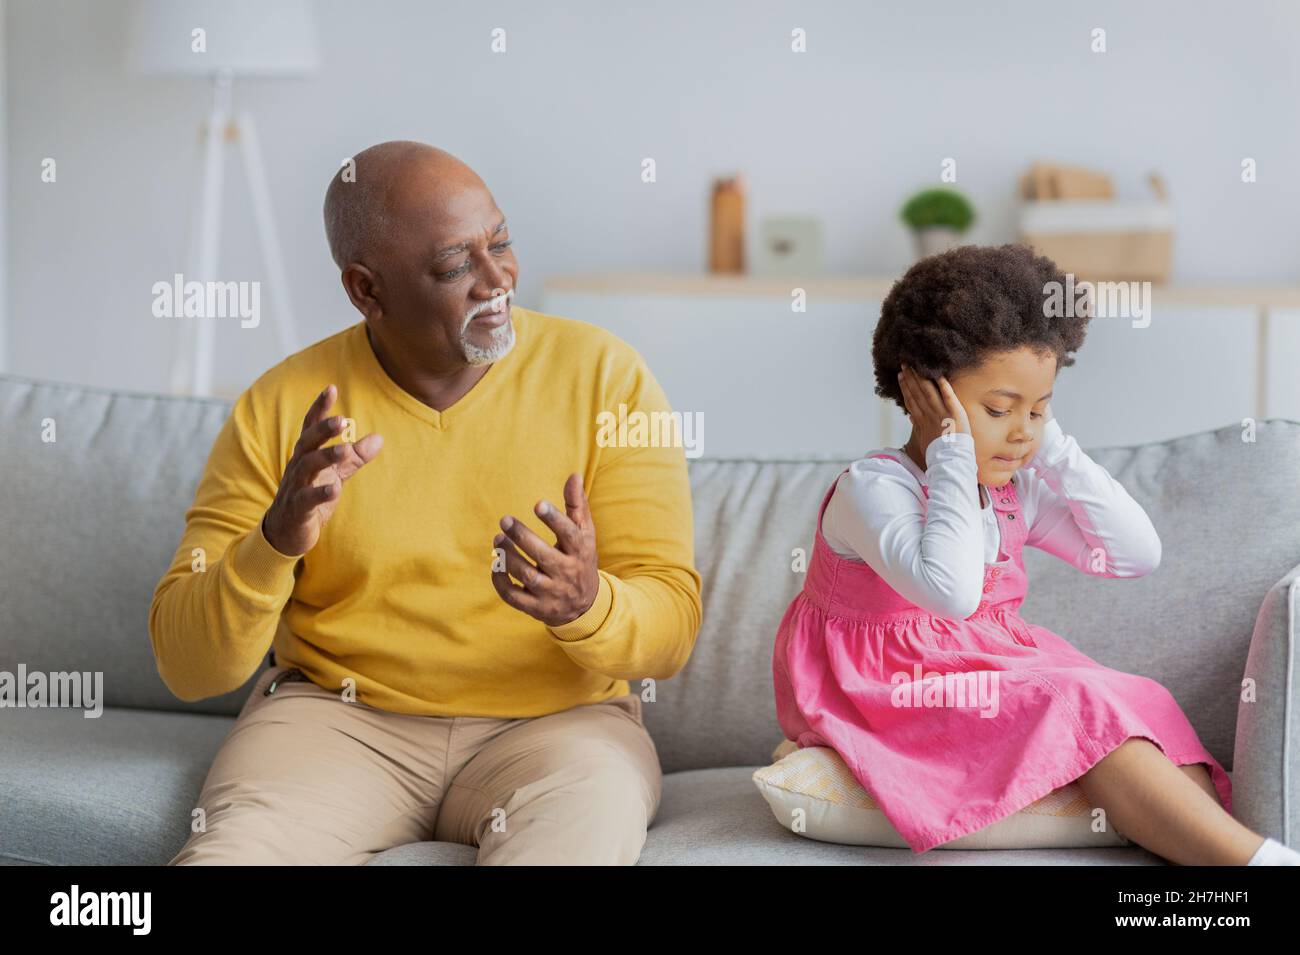 Upset sad black little girl closes her ears and does not want to listen to elderly man Stock Photo